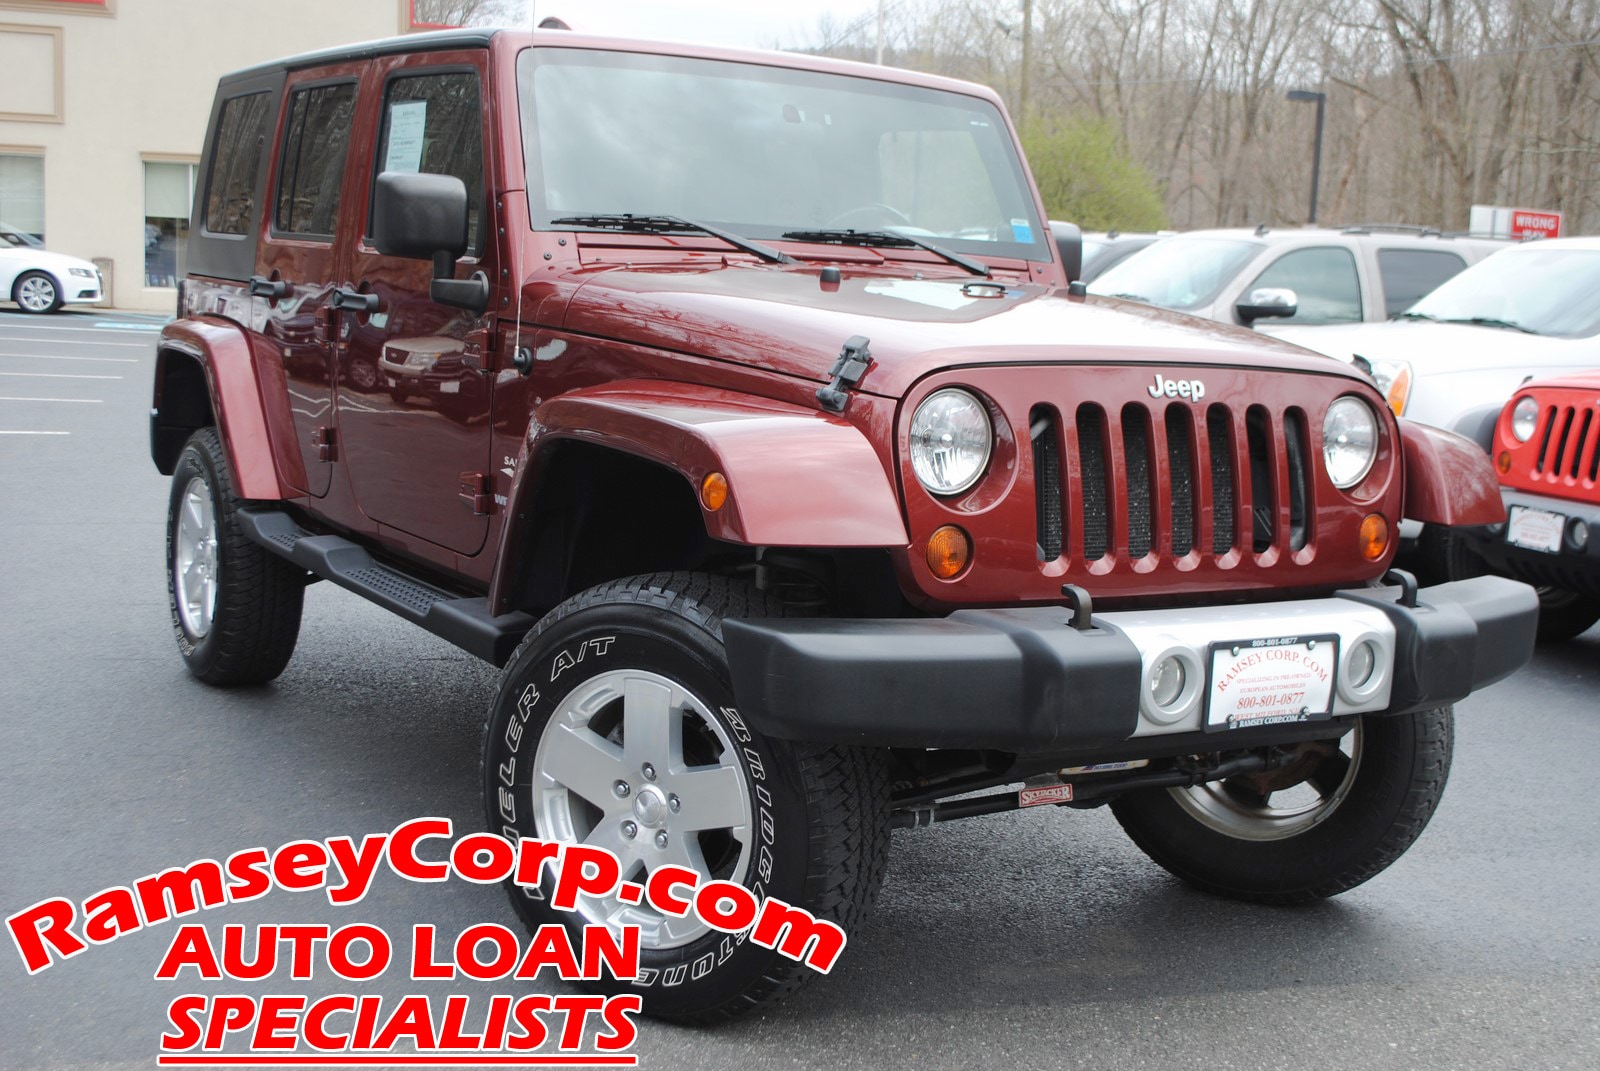 Used 2009 Jeep Wrangler Unlimited For Sale at Ramsey Corp. | VIN:  1J4GA59159L788204